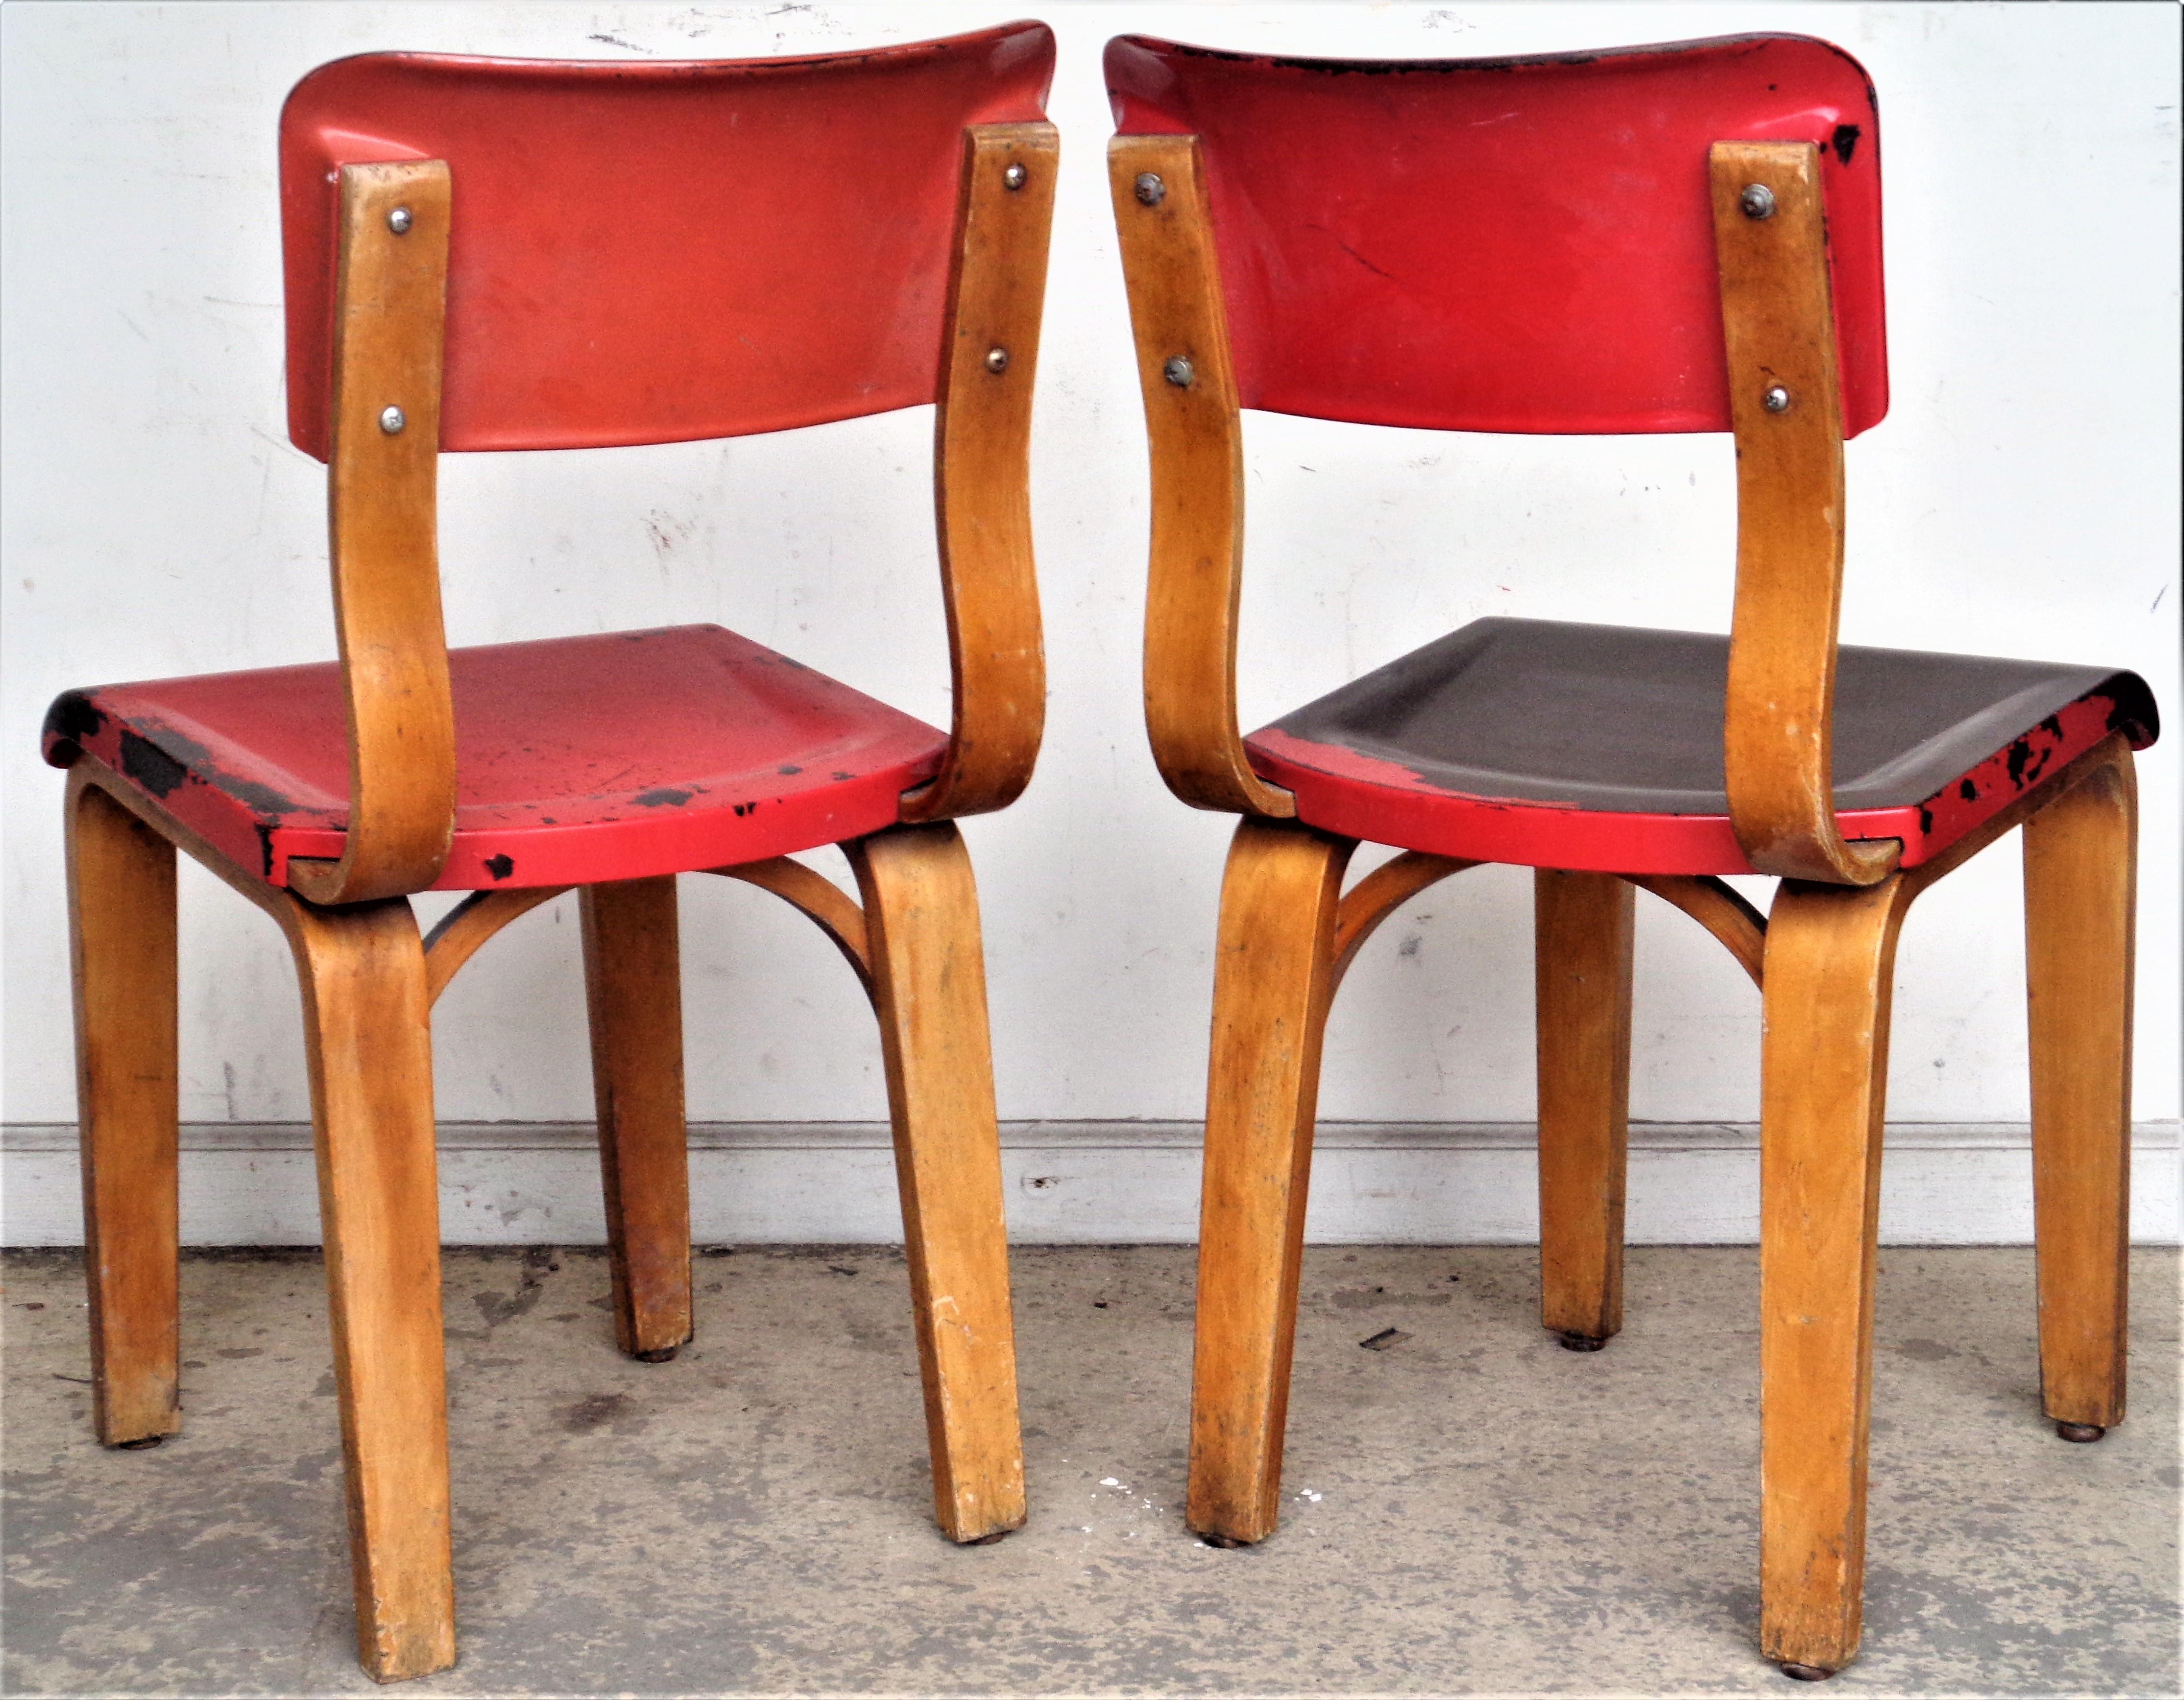 Thonet Bentwood and Bakelite Chairs, 1930's 4